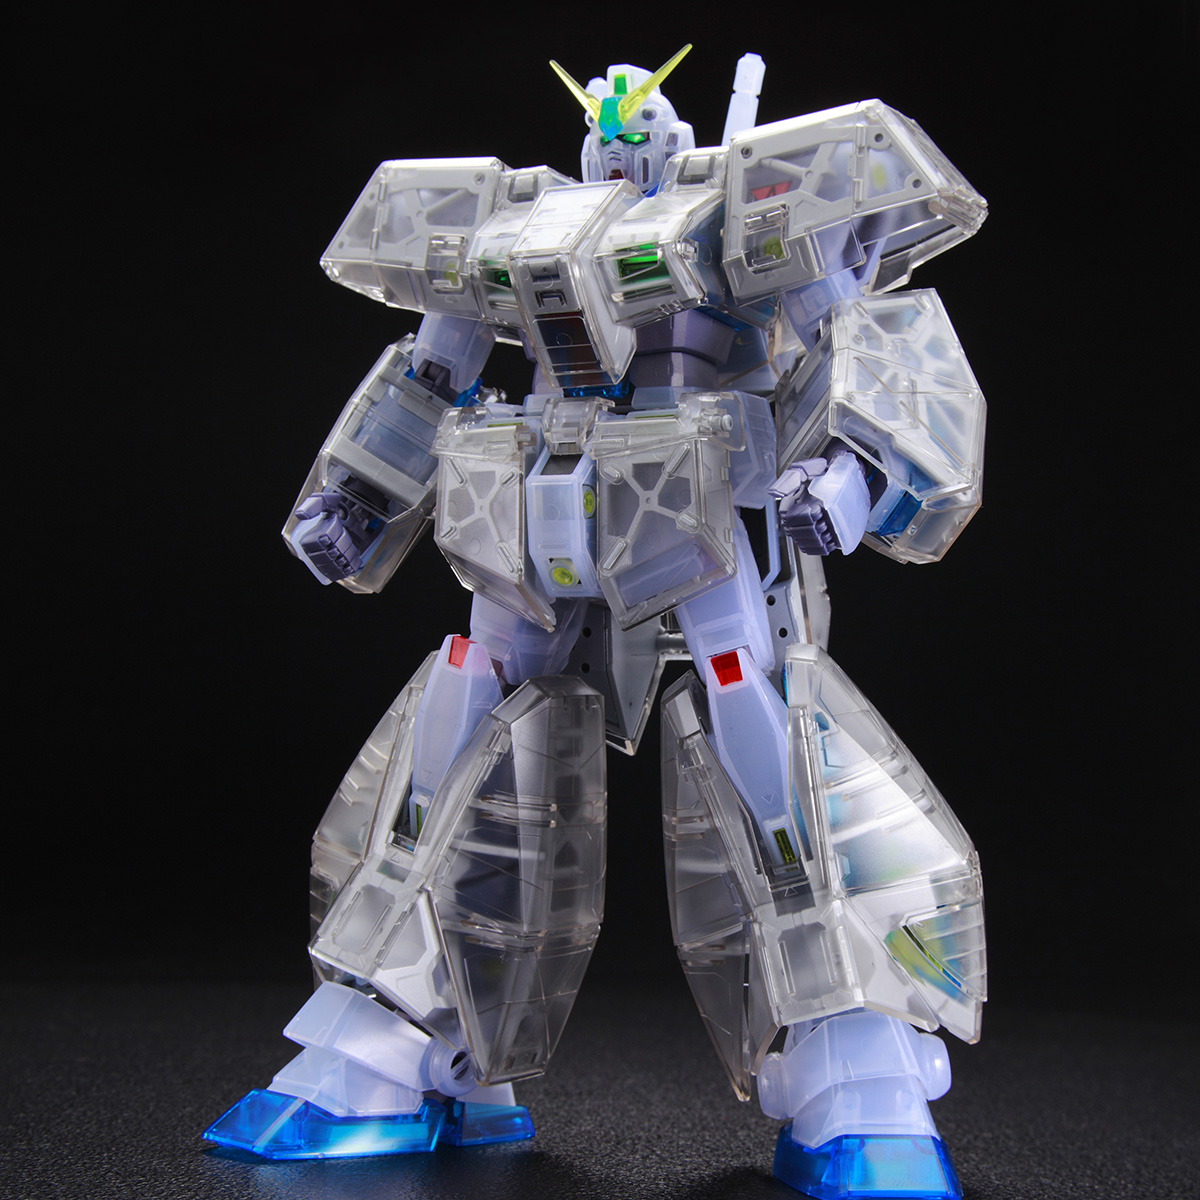 MG 1/100 GUNDAM NT-1 Ver.2.0 [CLEAR COLOR][Sep 2020 Delivery]